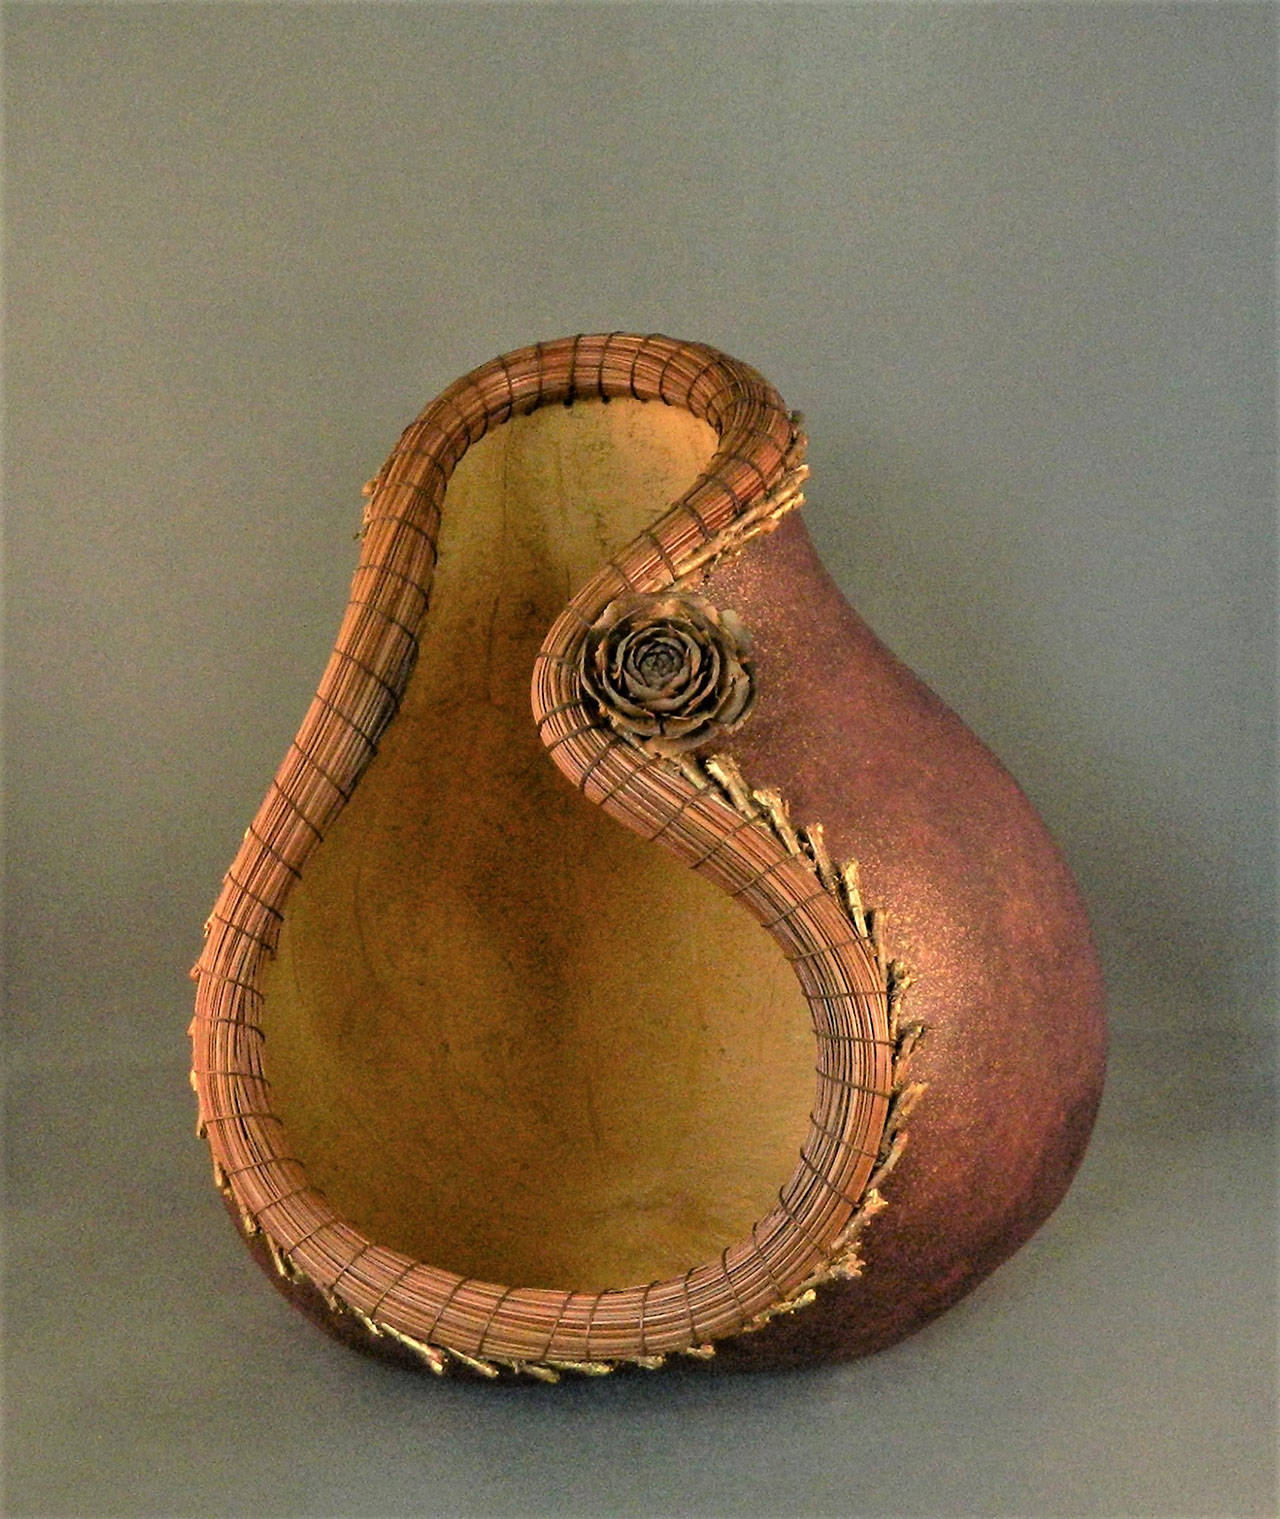 “Curvy Lady Gourd” by Roberta Cooper, a 2021 ARTfusion artist who will be exhibiting her craft and whose works will be on display Sept. 4-5.